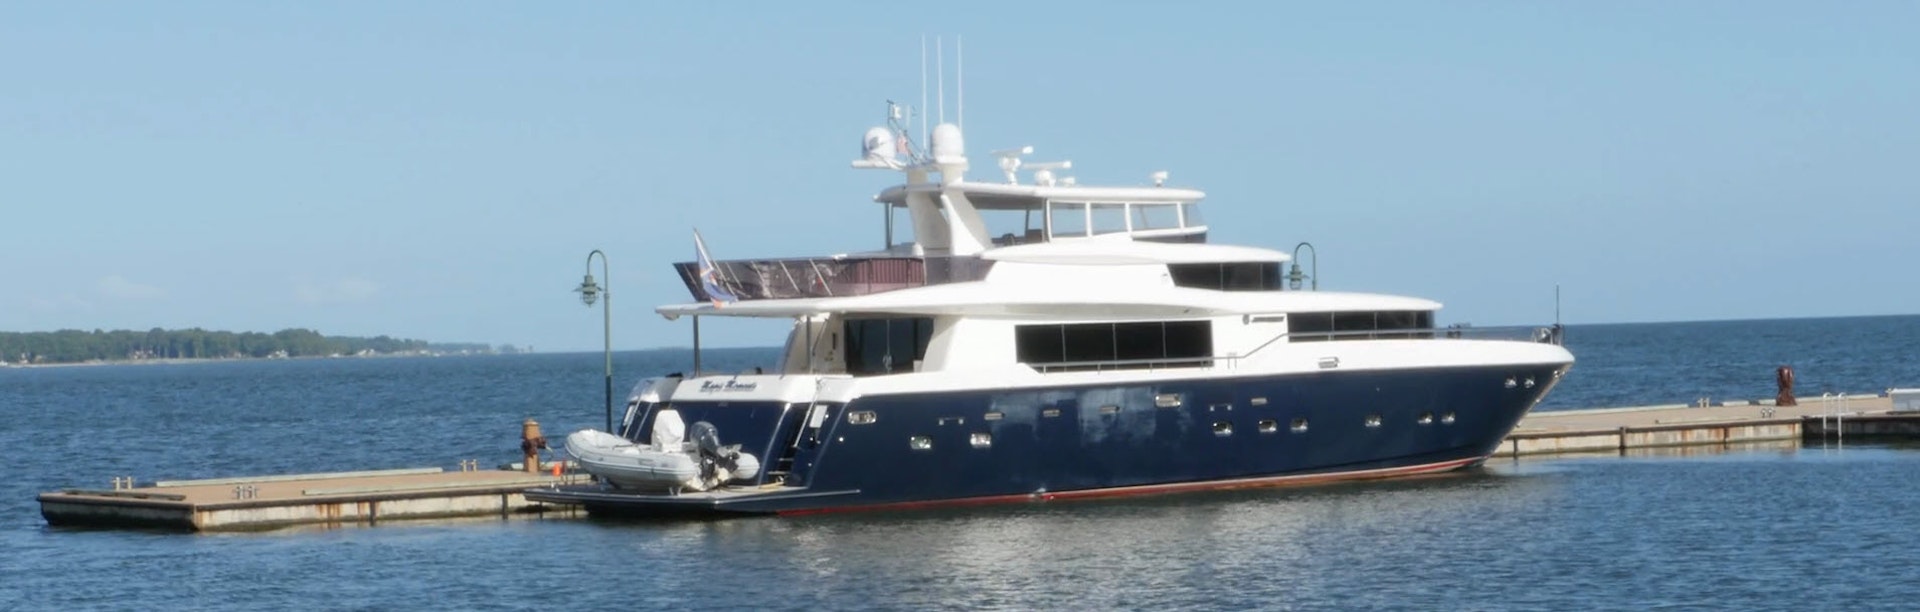 NEW and USED YACHTS for SALE Image